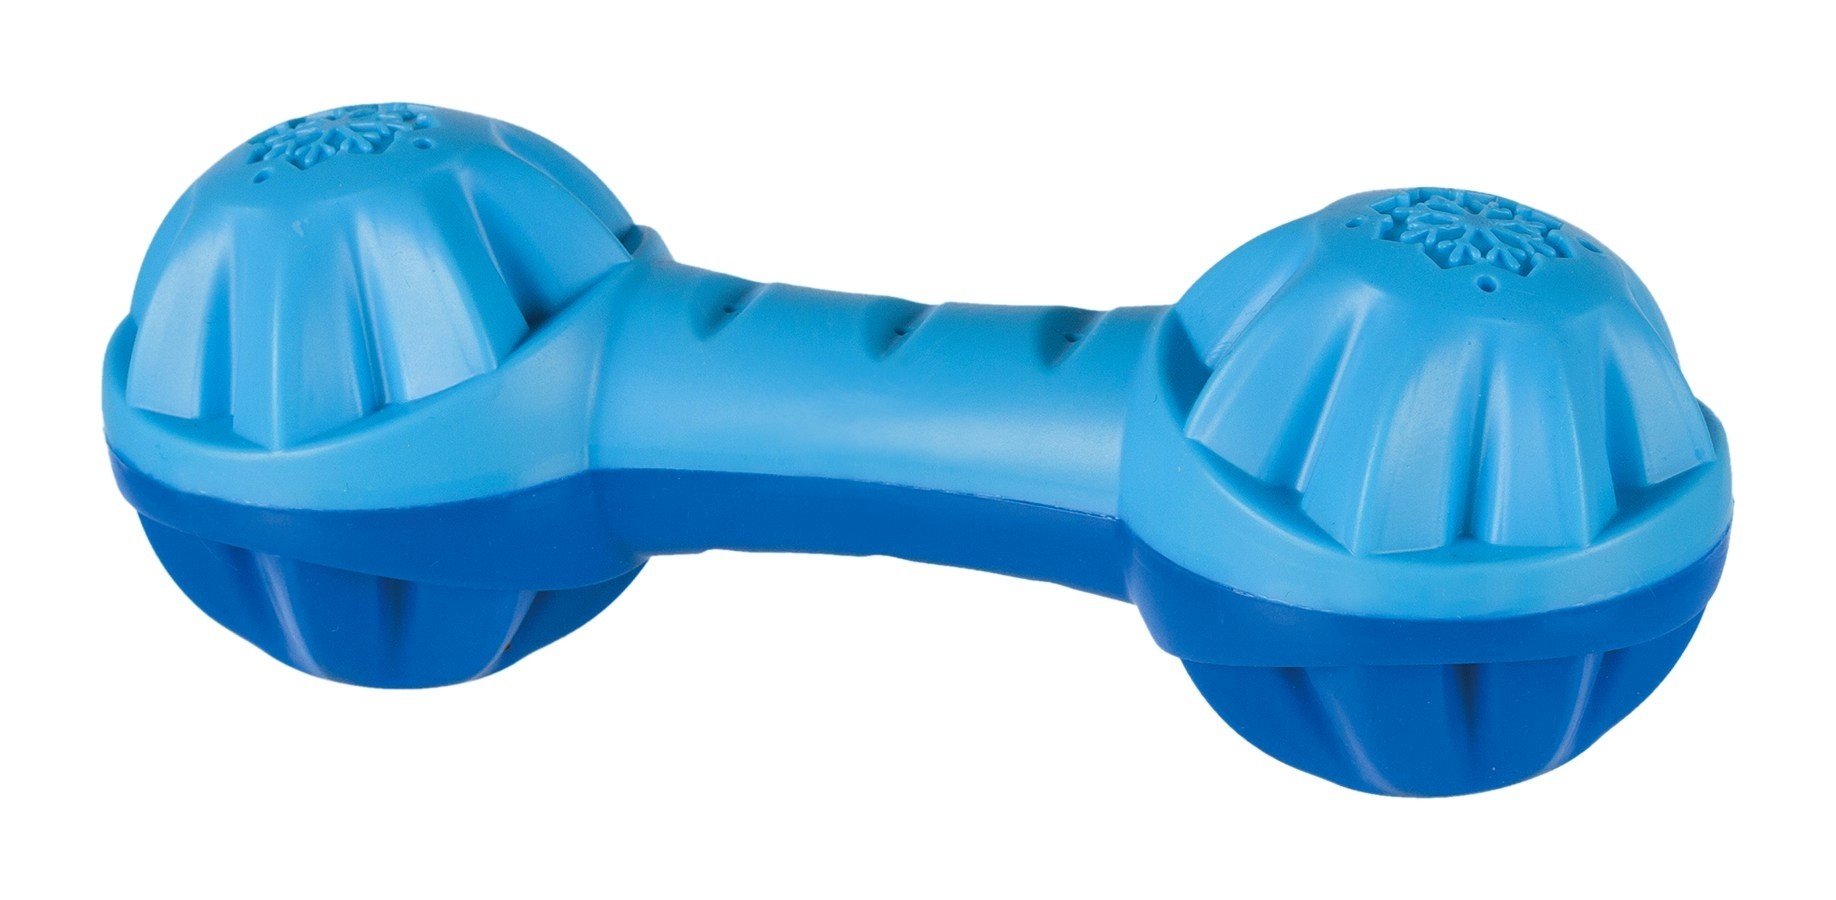 Dog Cooling Dumbbell Toy TPR 